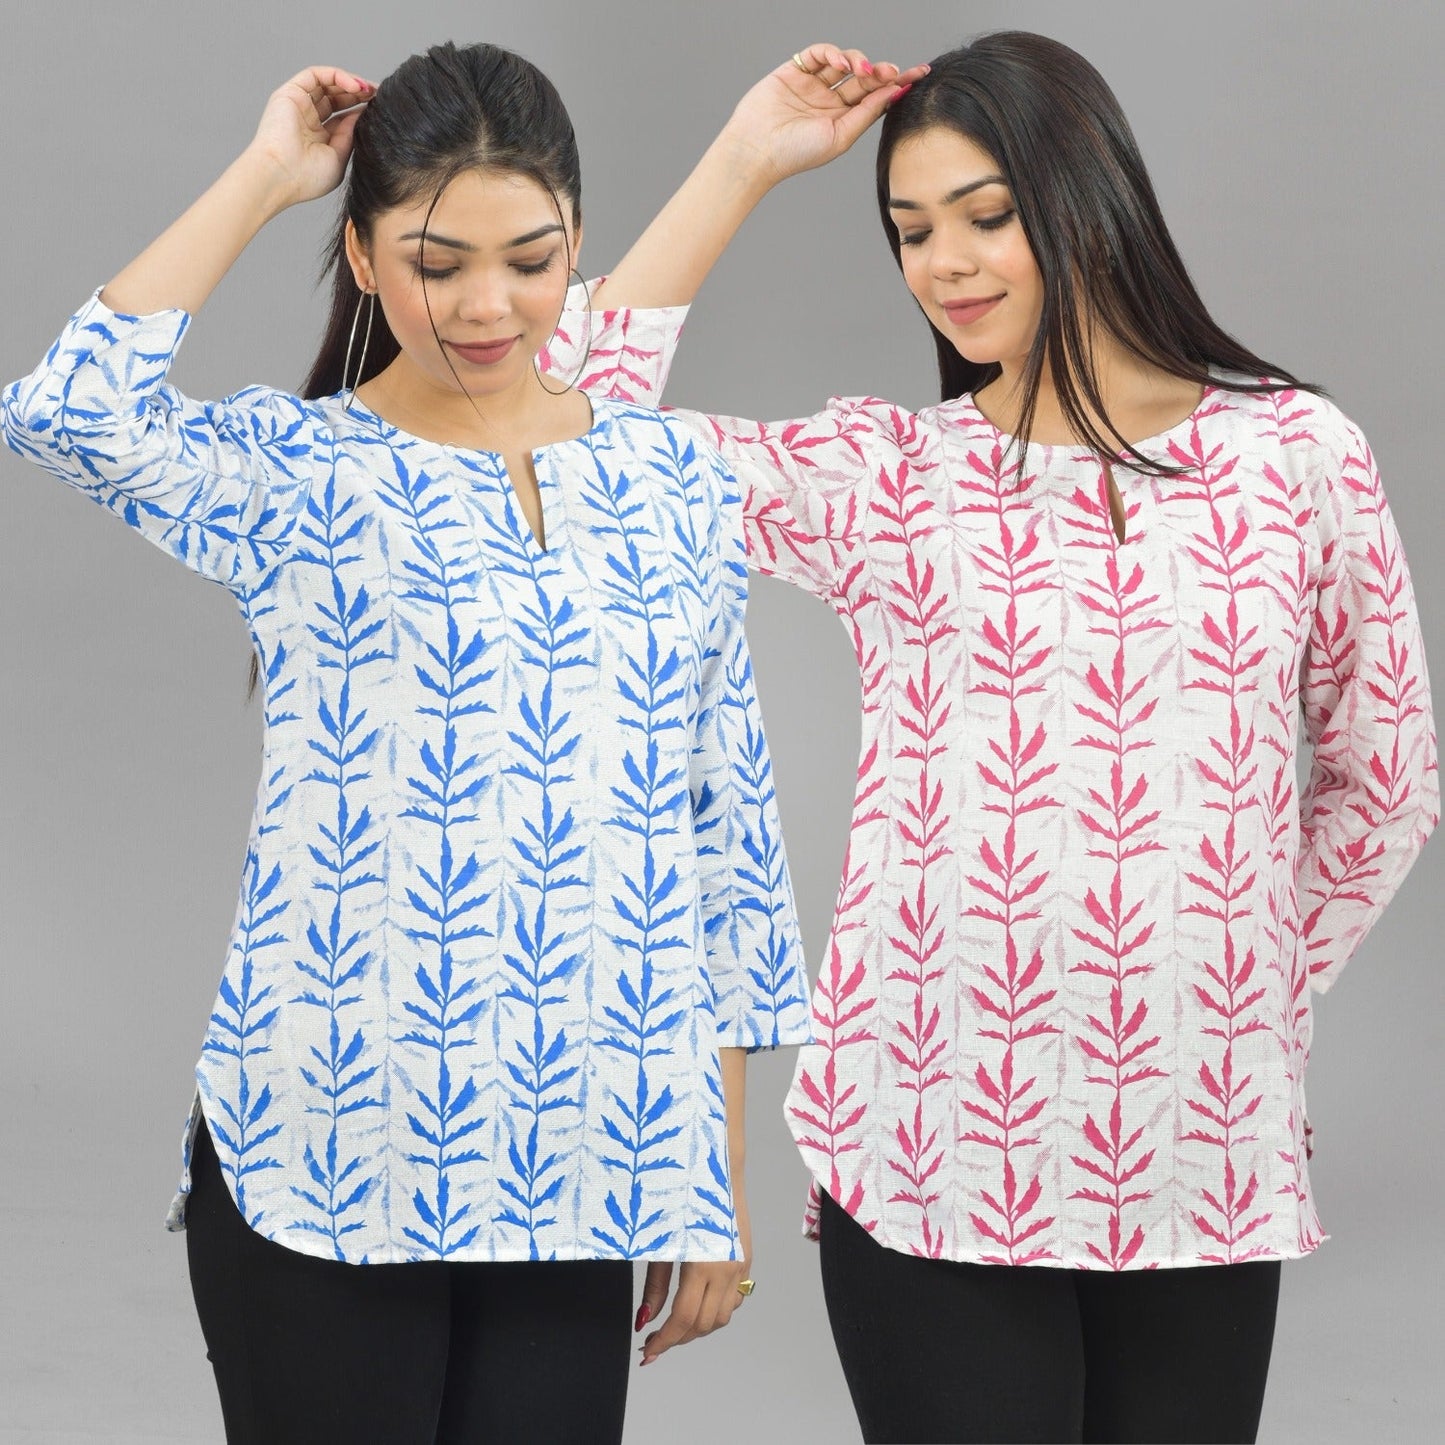 Pack Of 2 Womens Regular Fit Blue Leaf And Pink Leaf Printed Tops Combo